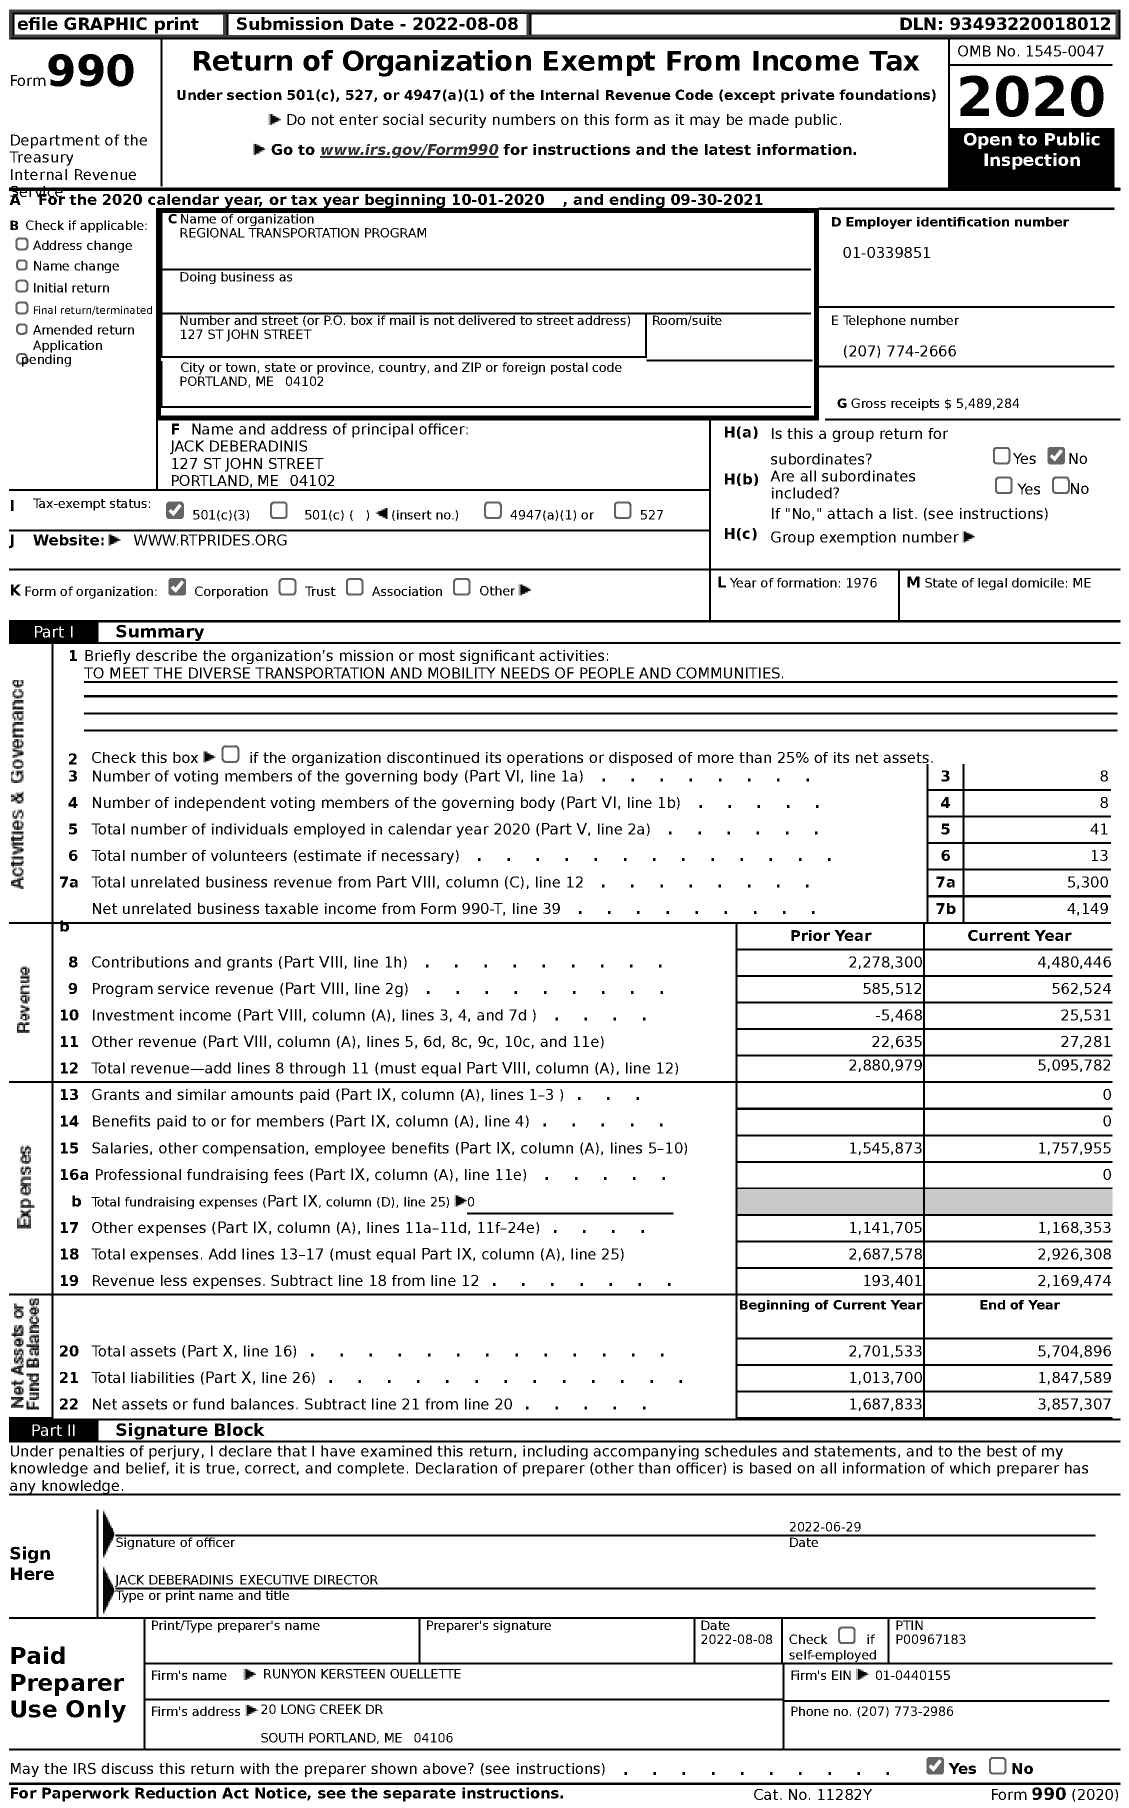 Image of first page of 2020 Form 990 for Regional Transportation Program